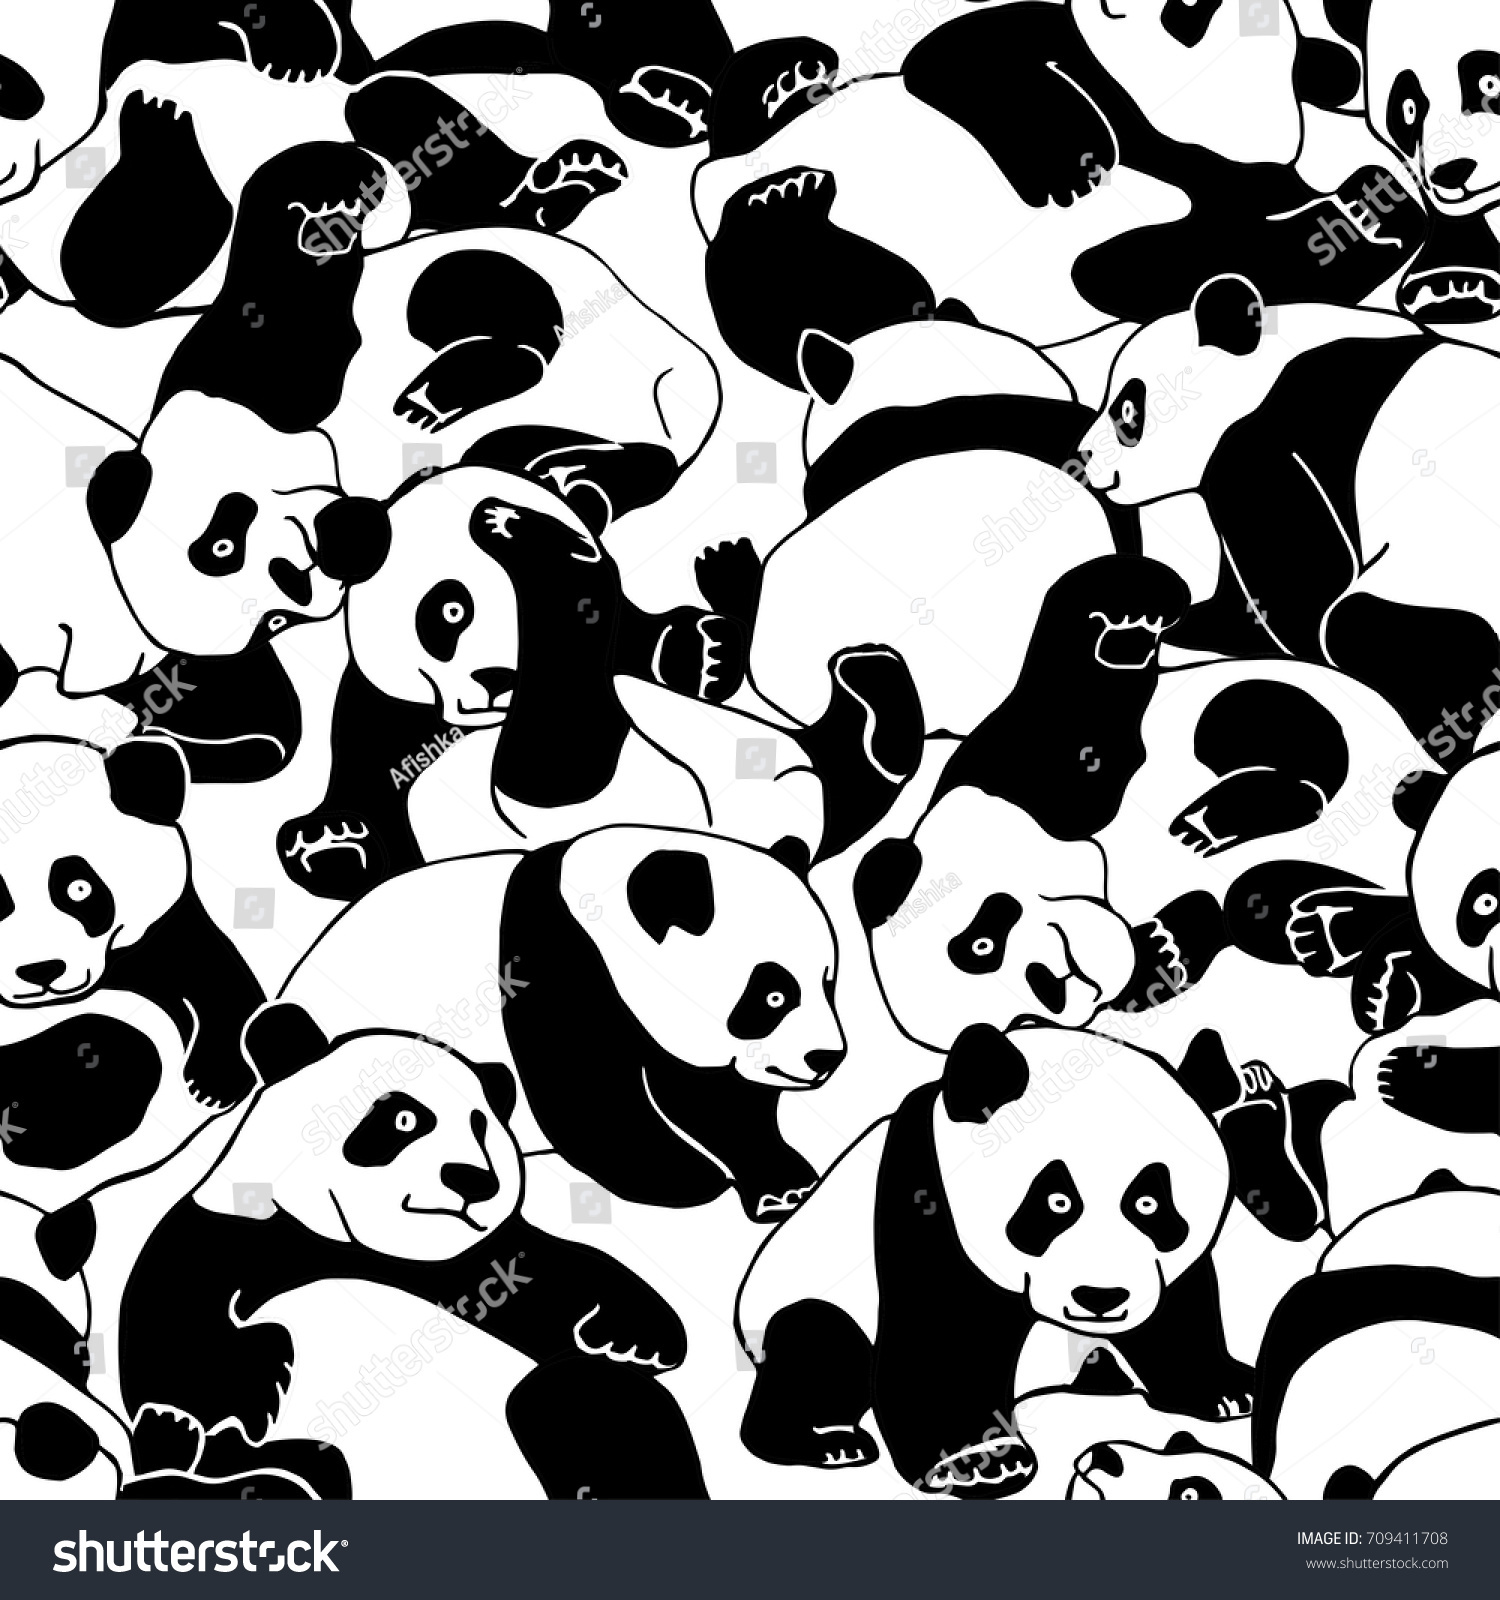 SVG of Seamless pattern with a cartoon young pandas very close to each other. Vector black and white illustration. svg